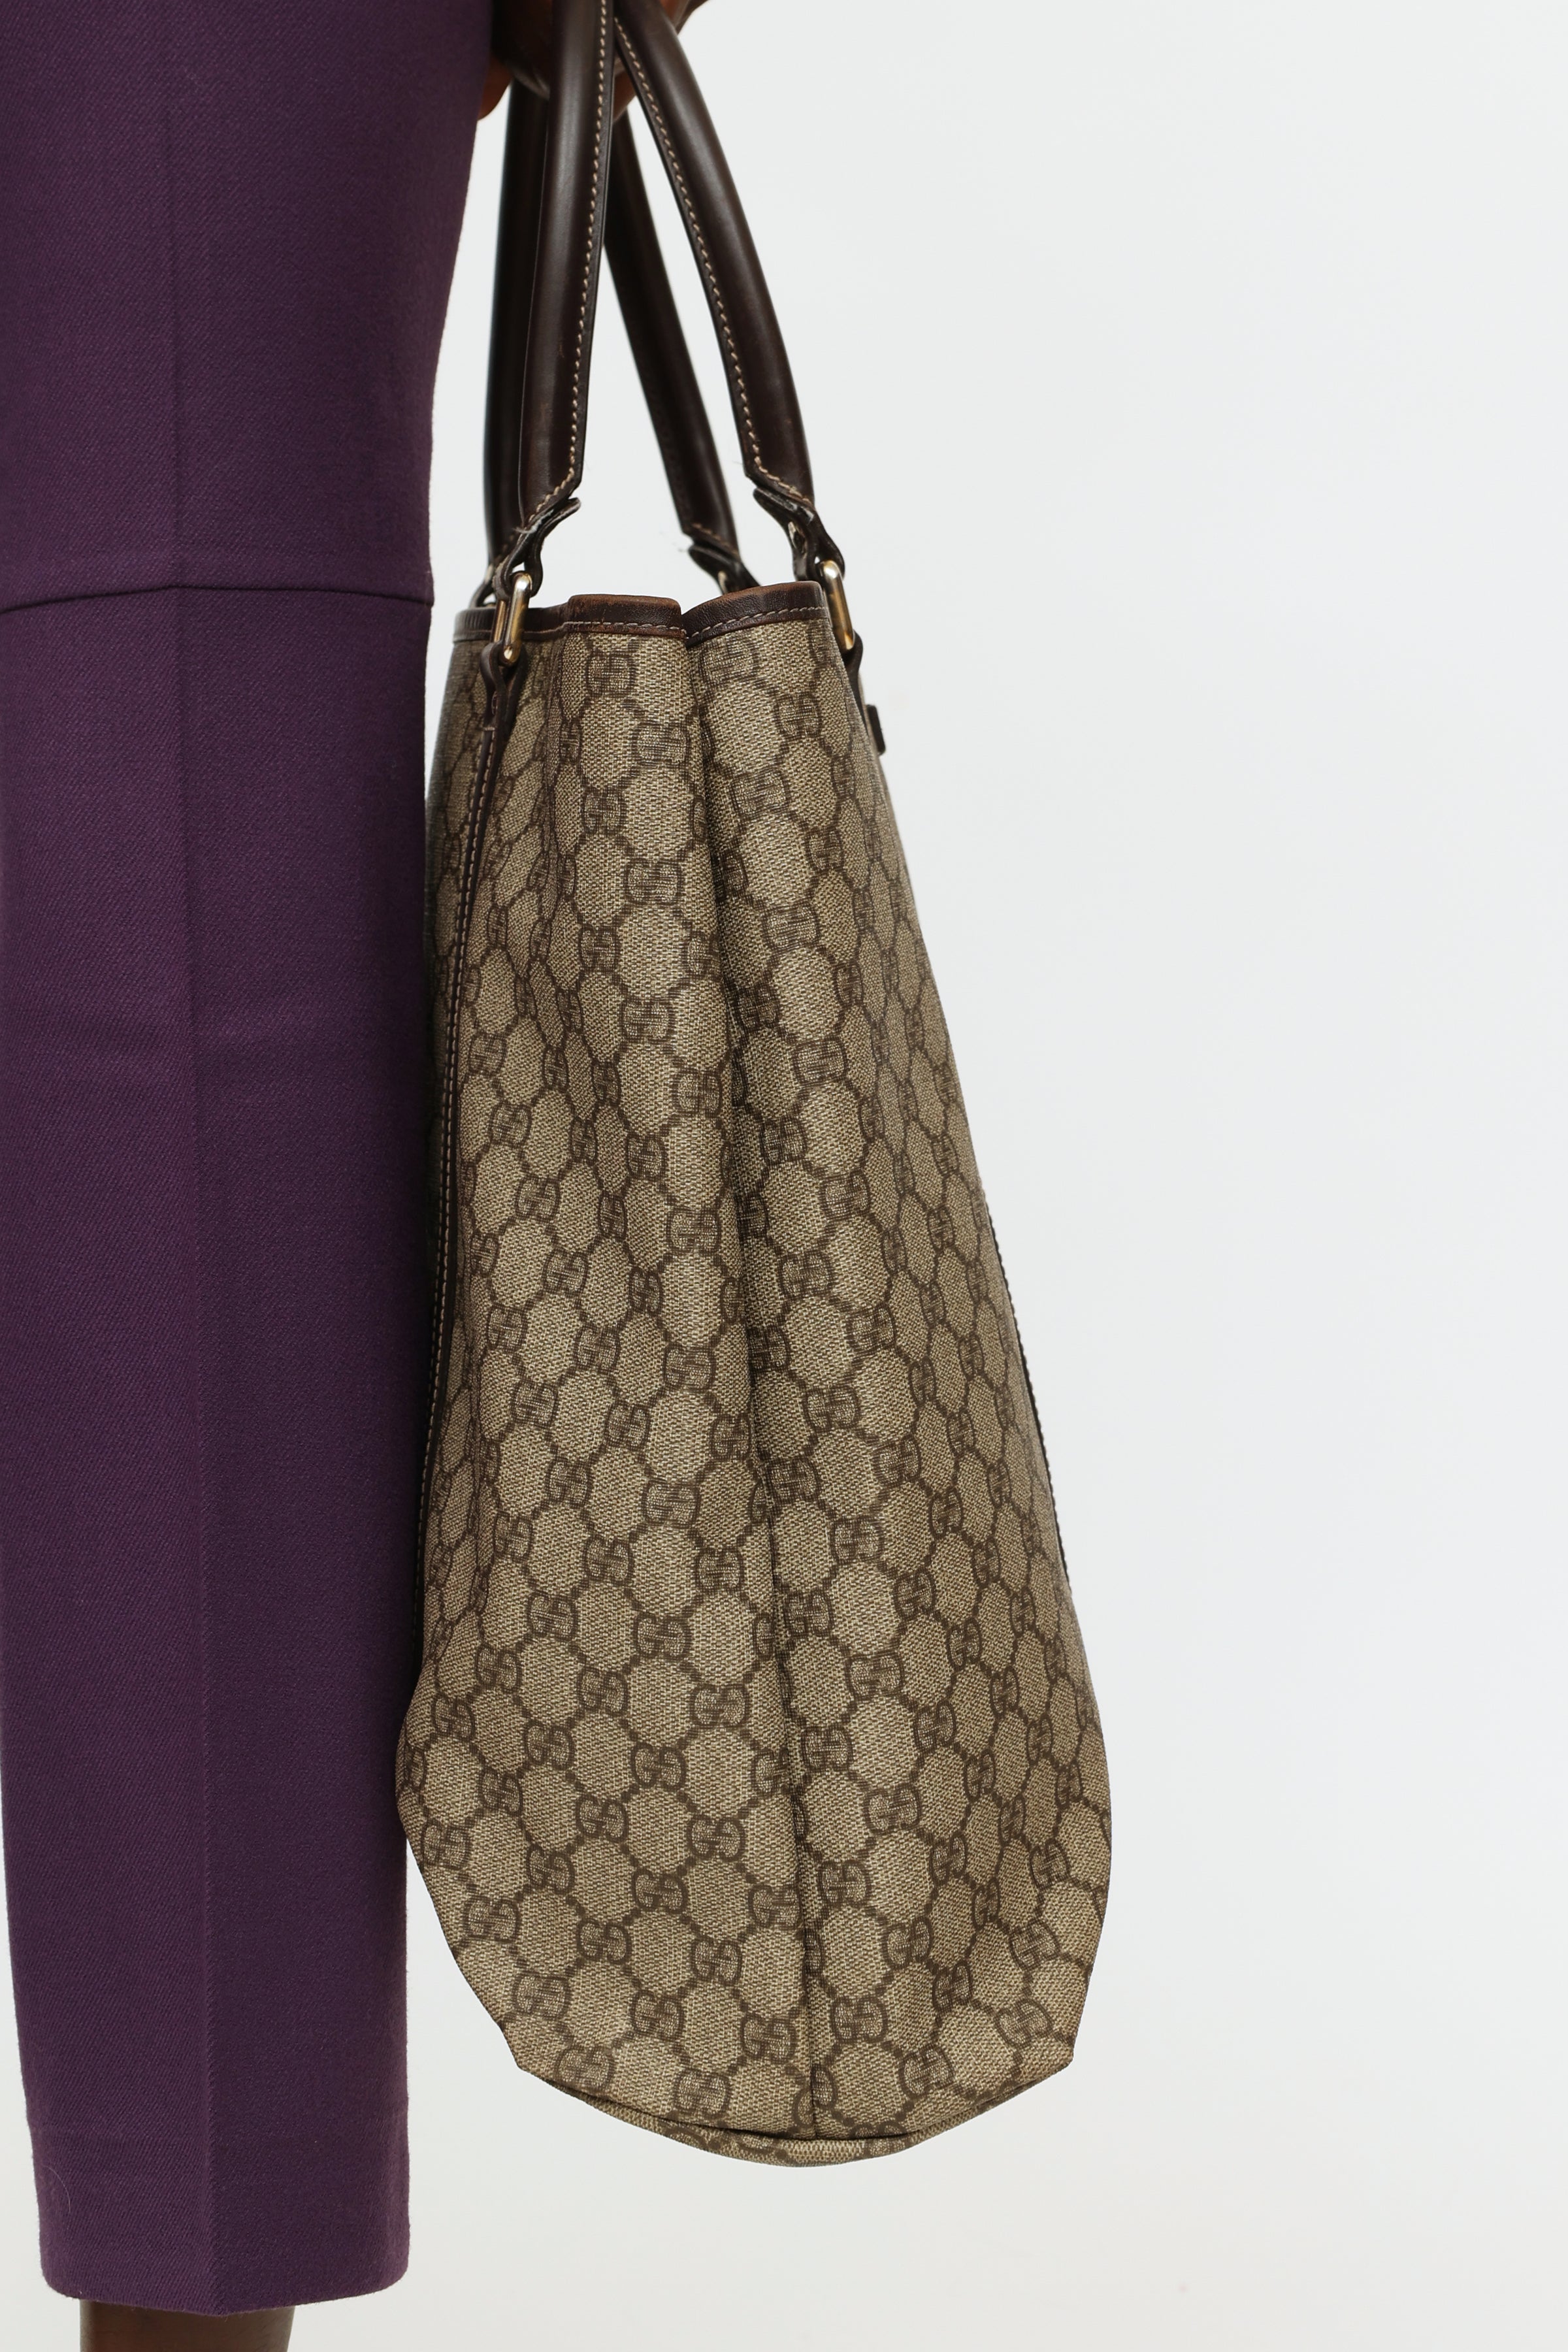 Gucci Mini Tote Bag - New in Dust Bag - The Consignment Cafe